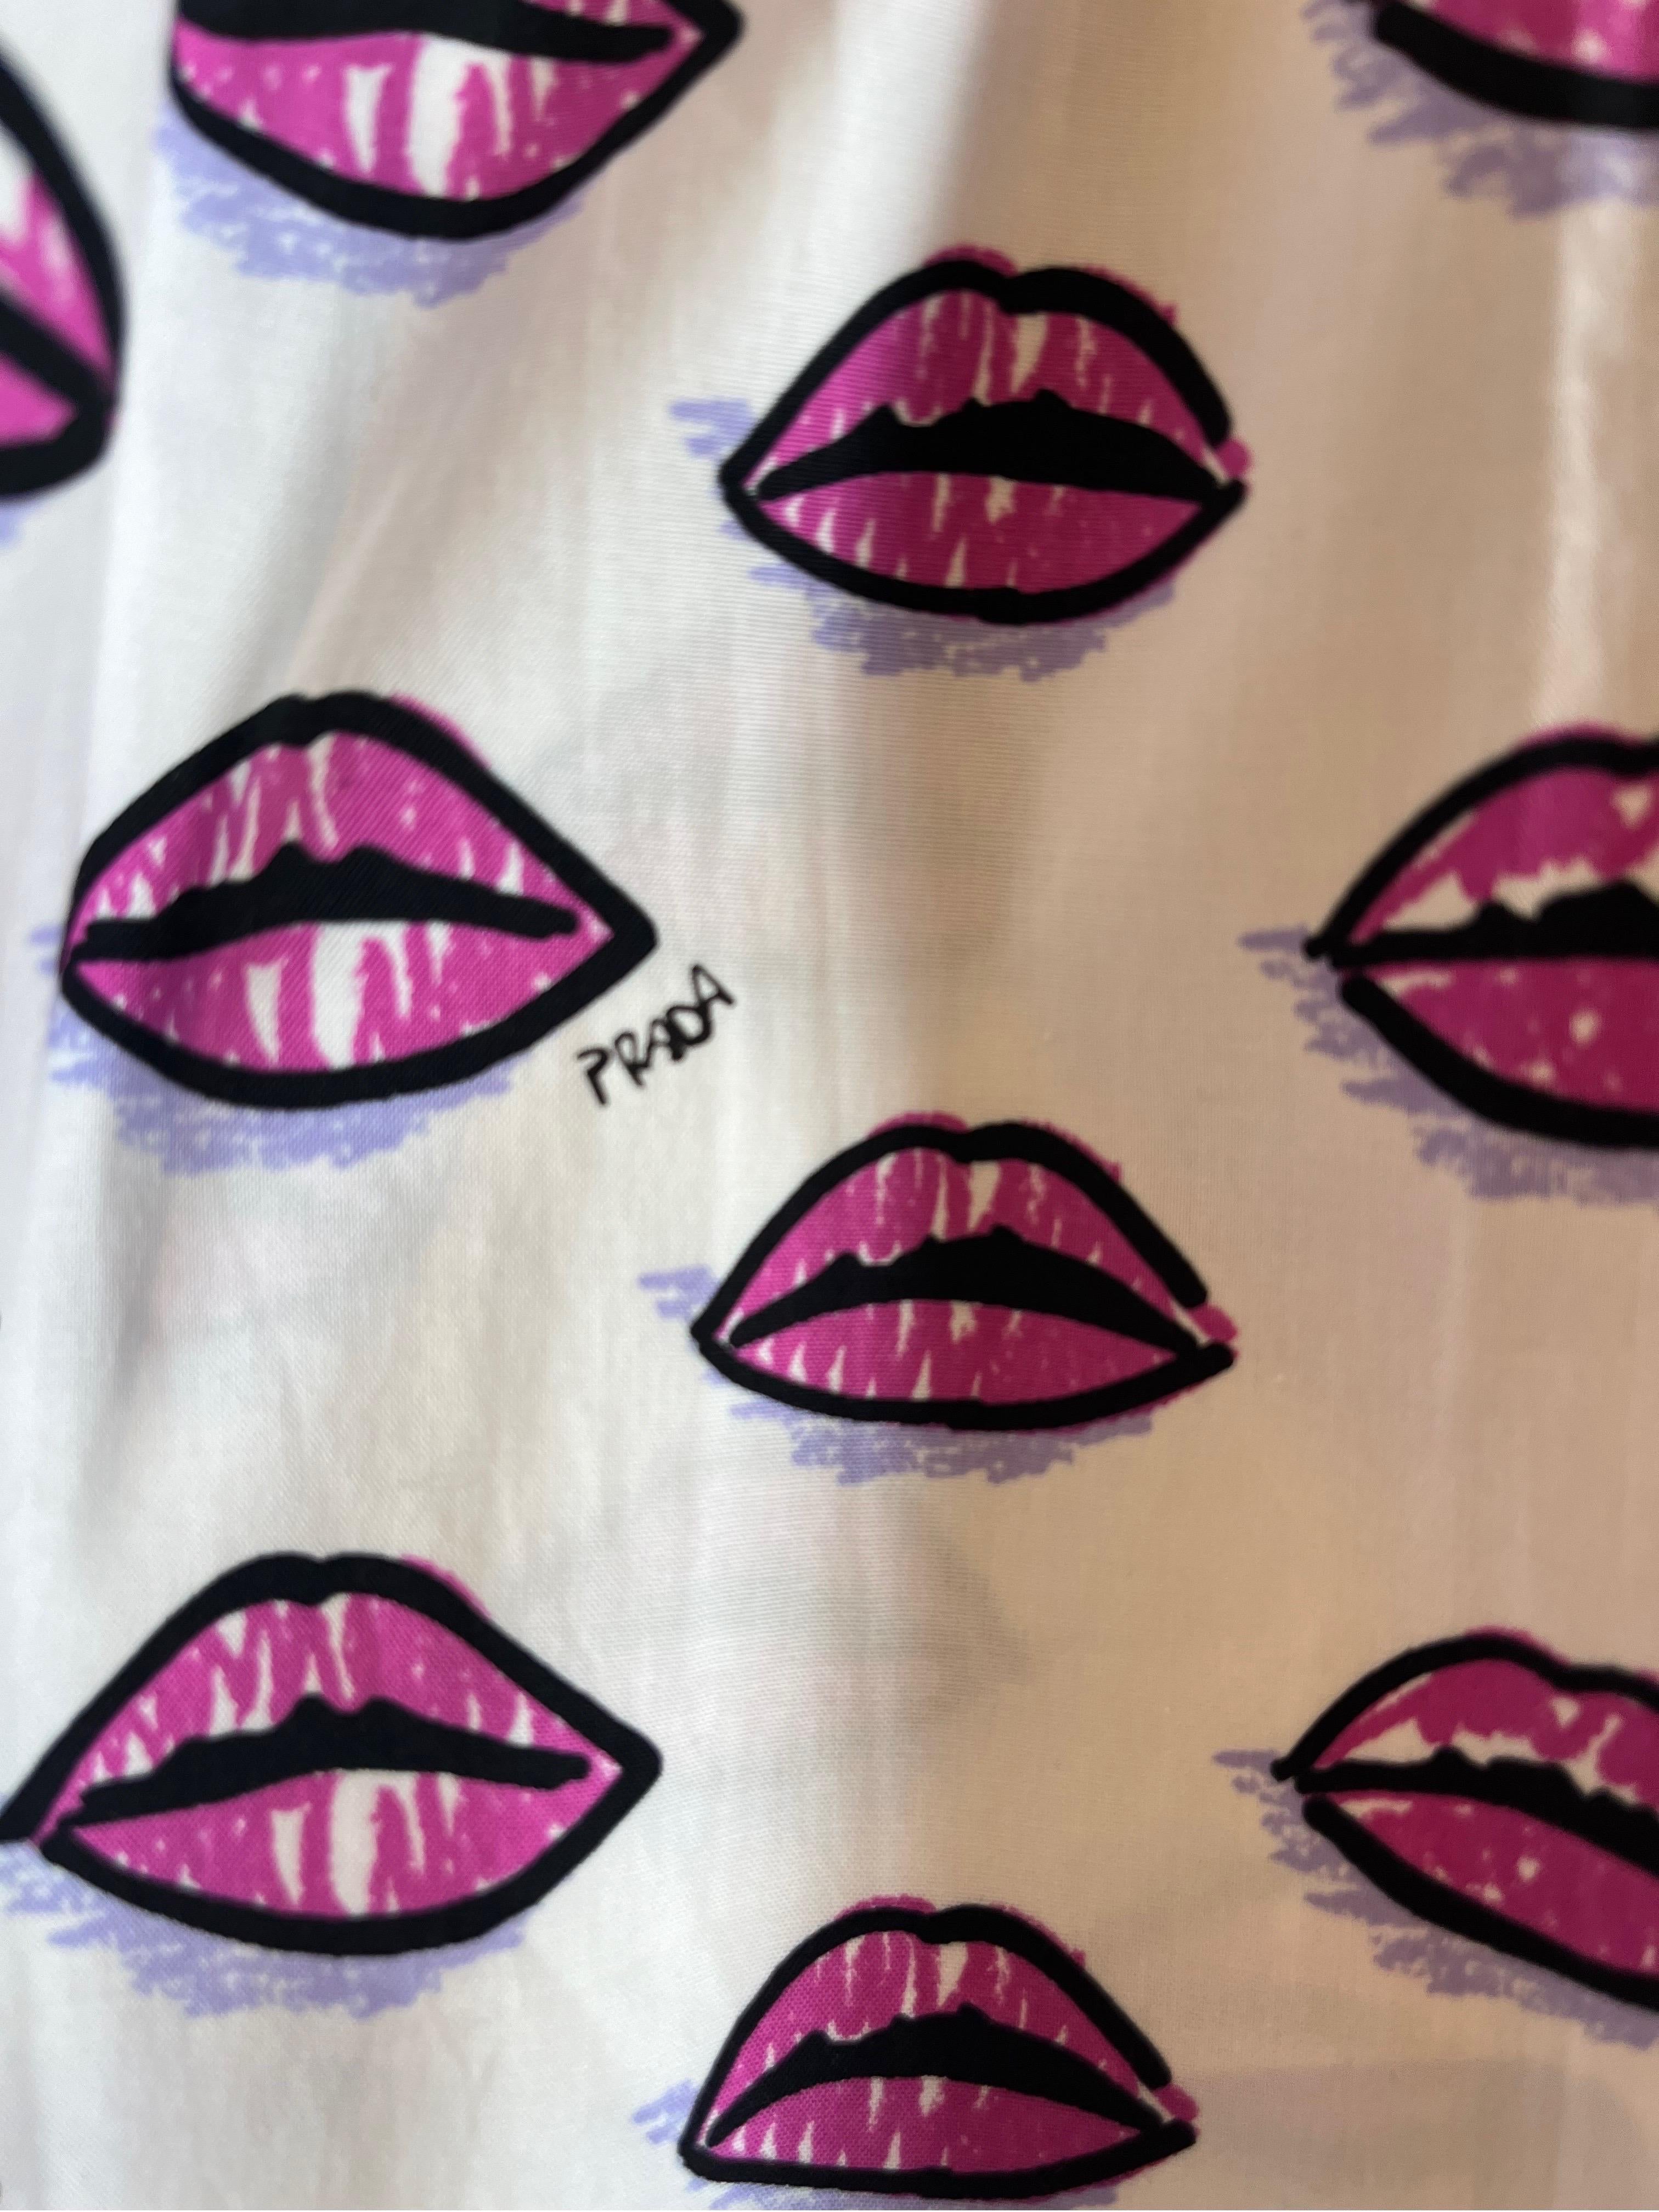 2017 Prada Iconic Lip Print Full Skirt In Excellent Condition For Sale In Miami, FL